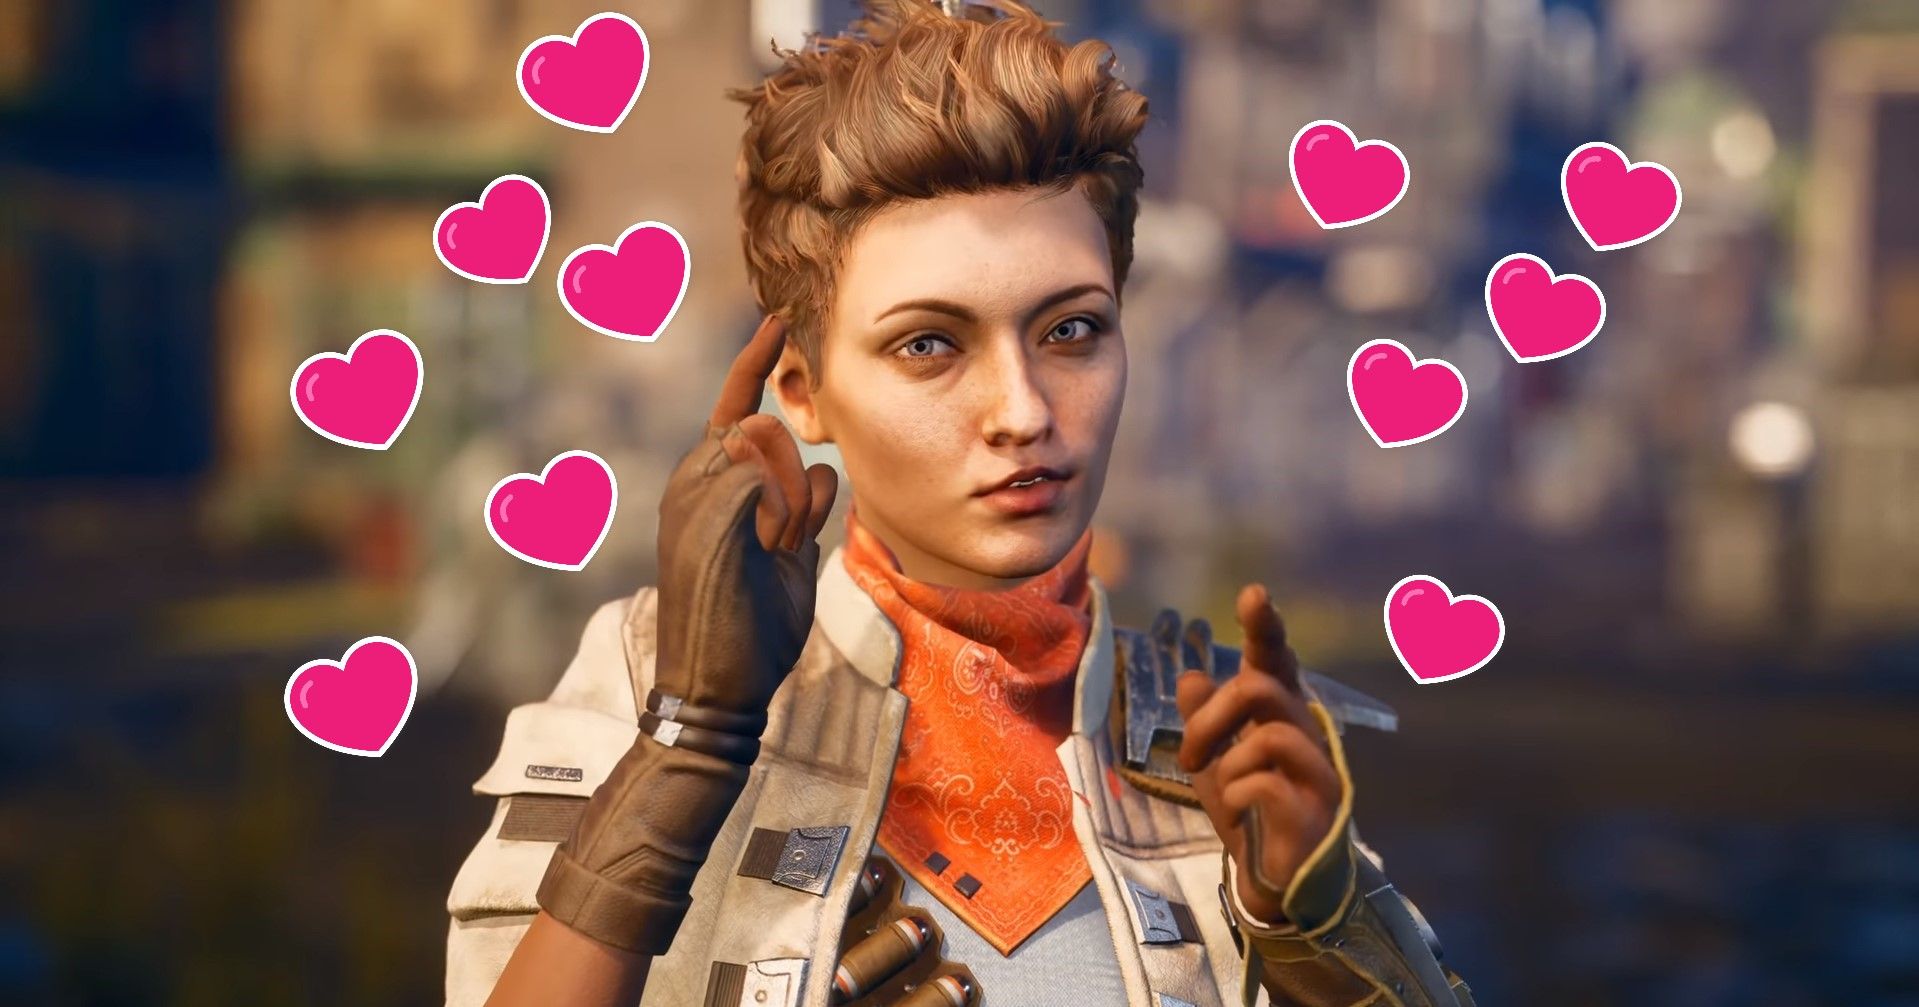 The Outer Worlds Doesn’t Need Romance Options